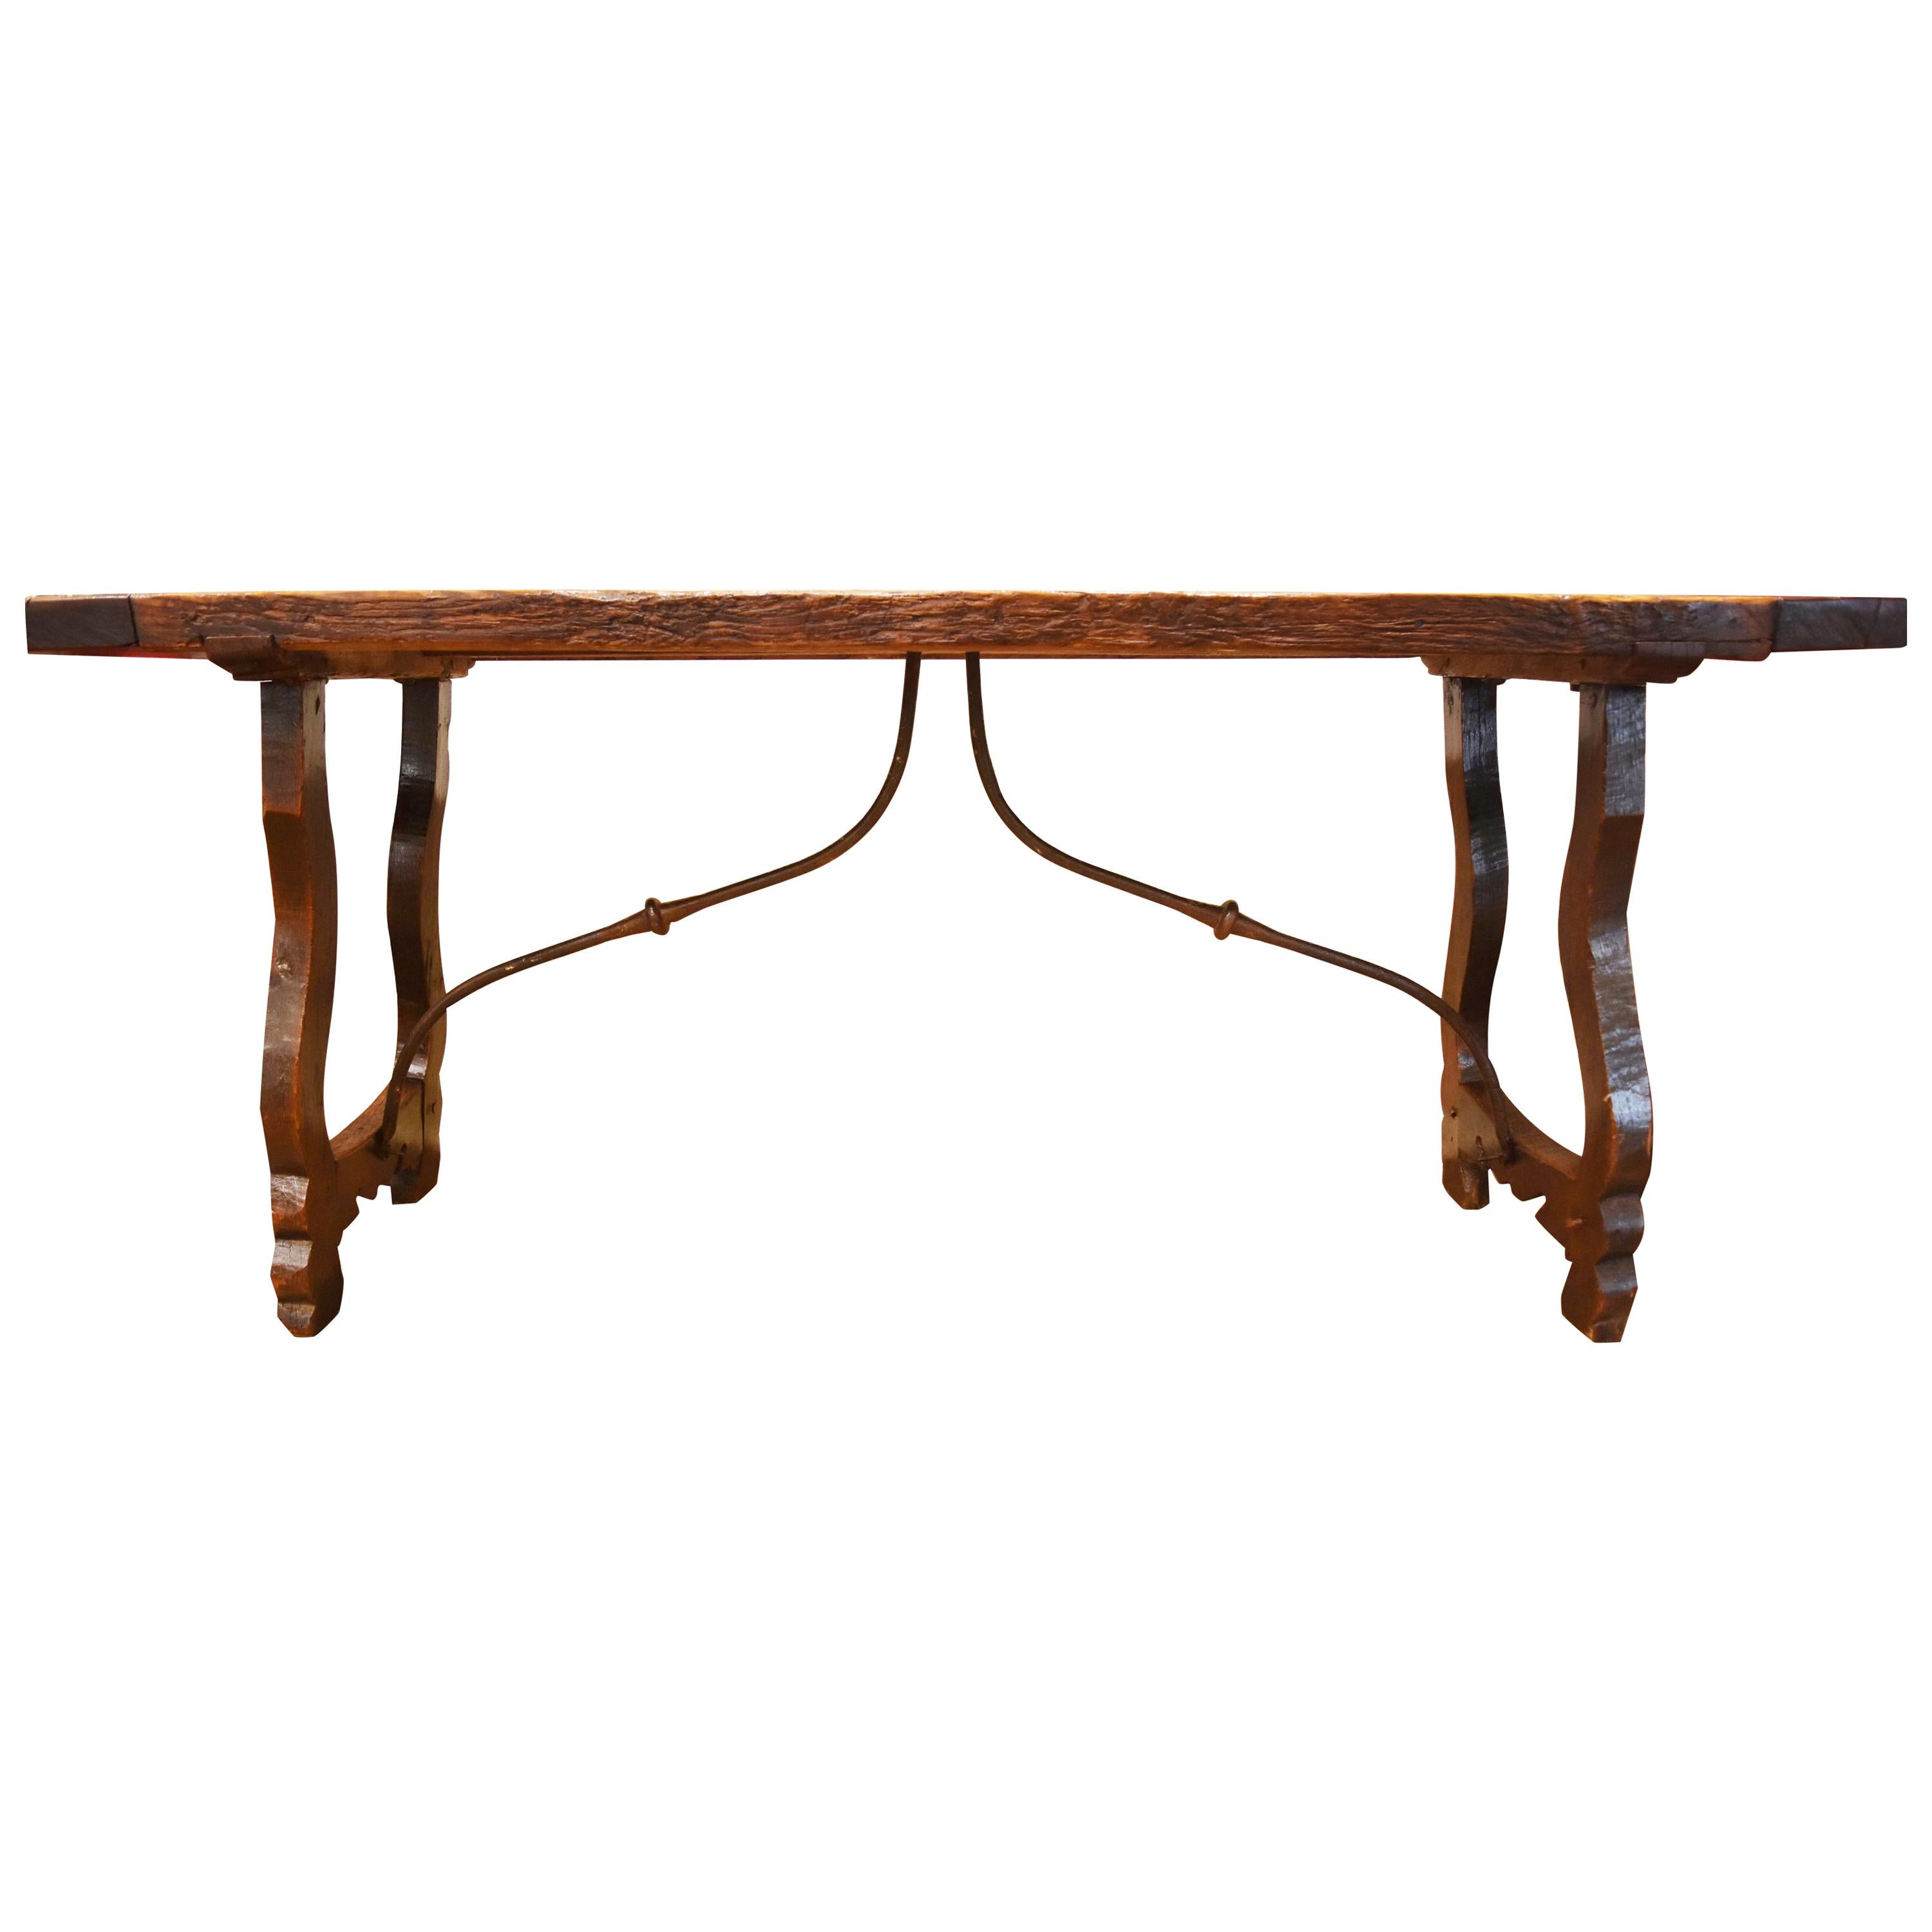 Early 19th Century Spanish Refectory Table